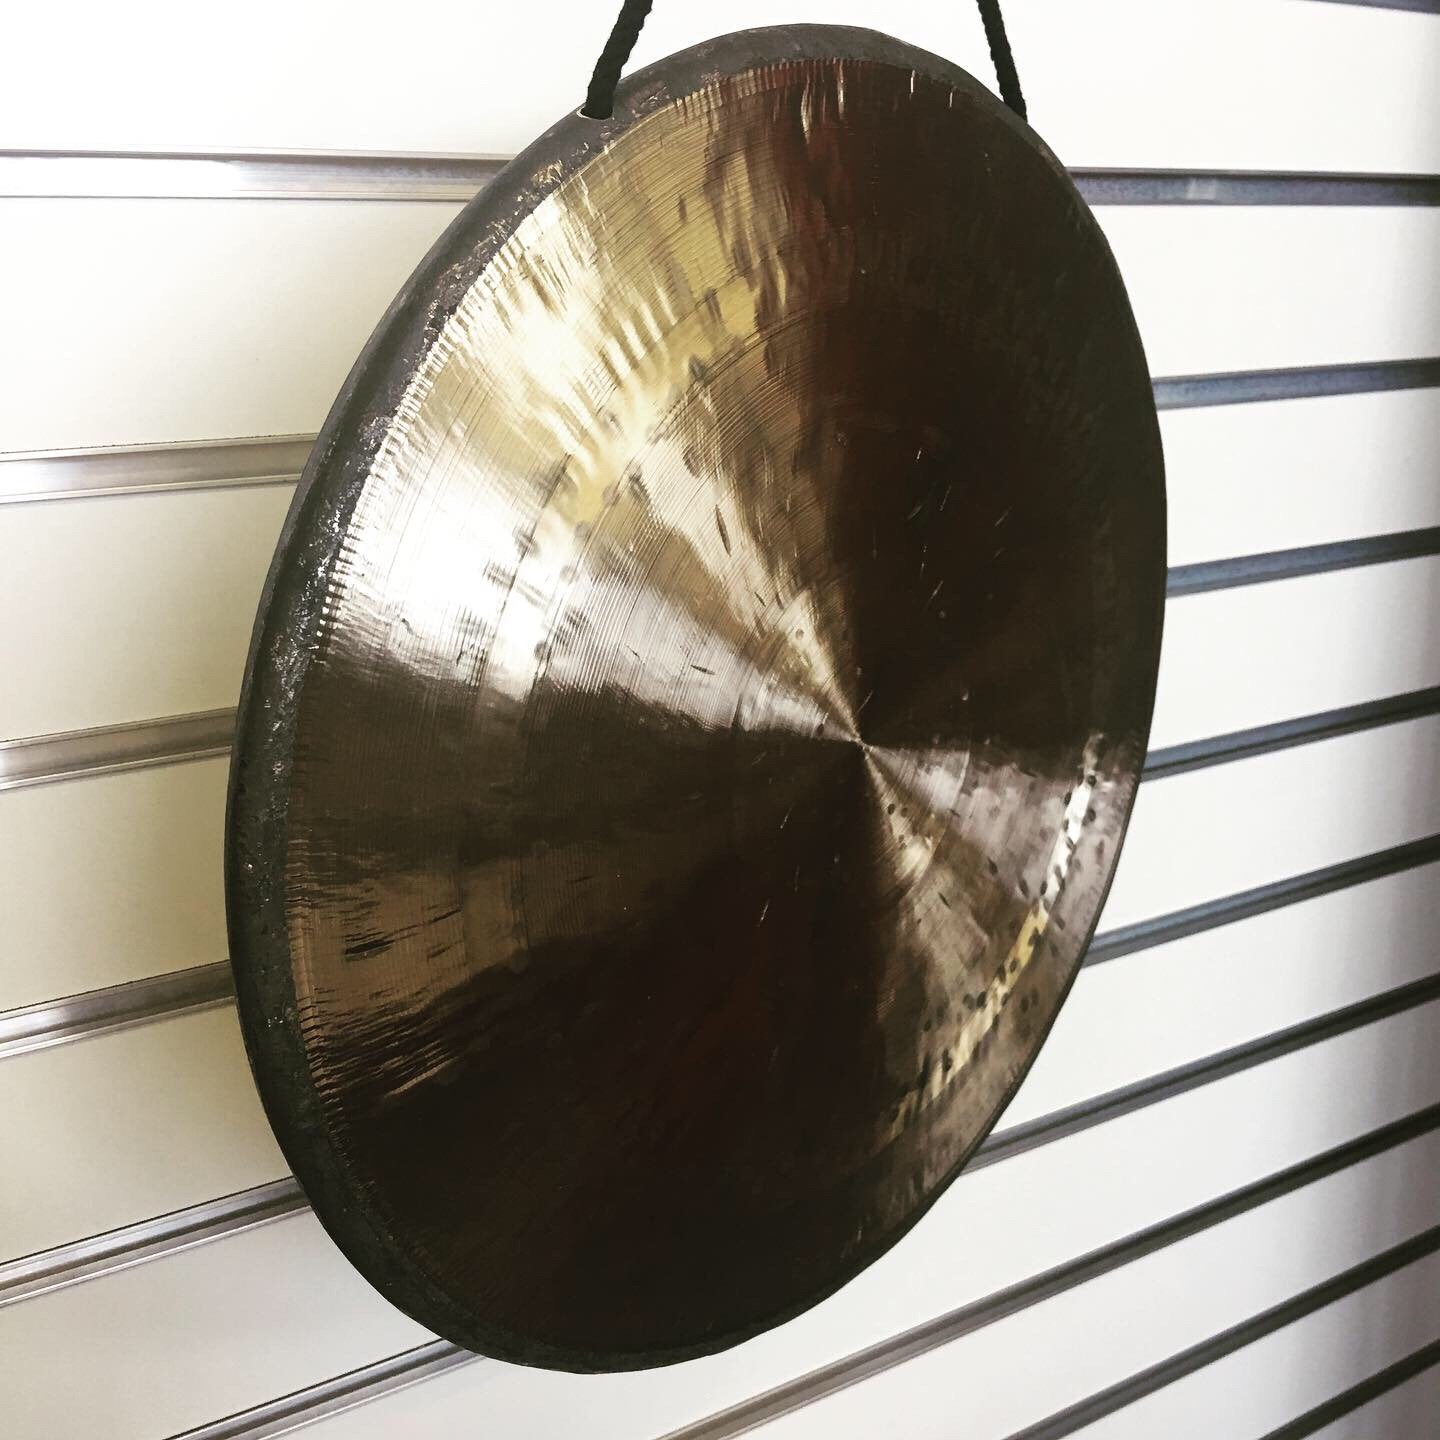 Gongs for Sale - High Quality Gongs - The Gong Shop